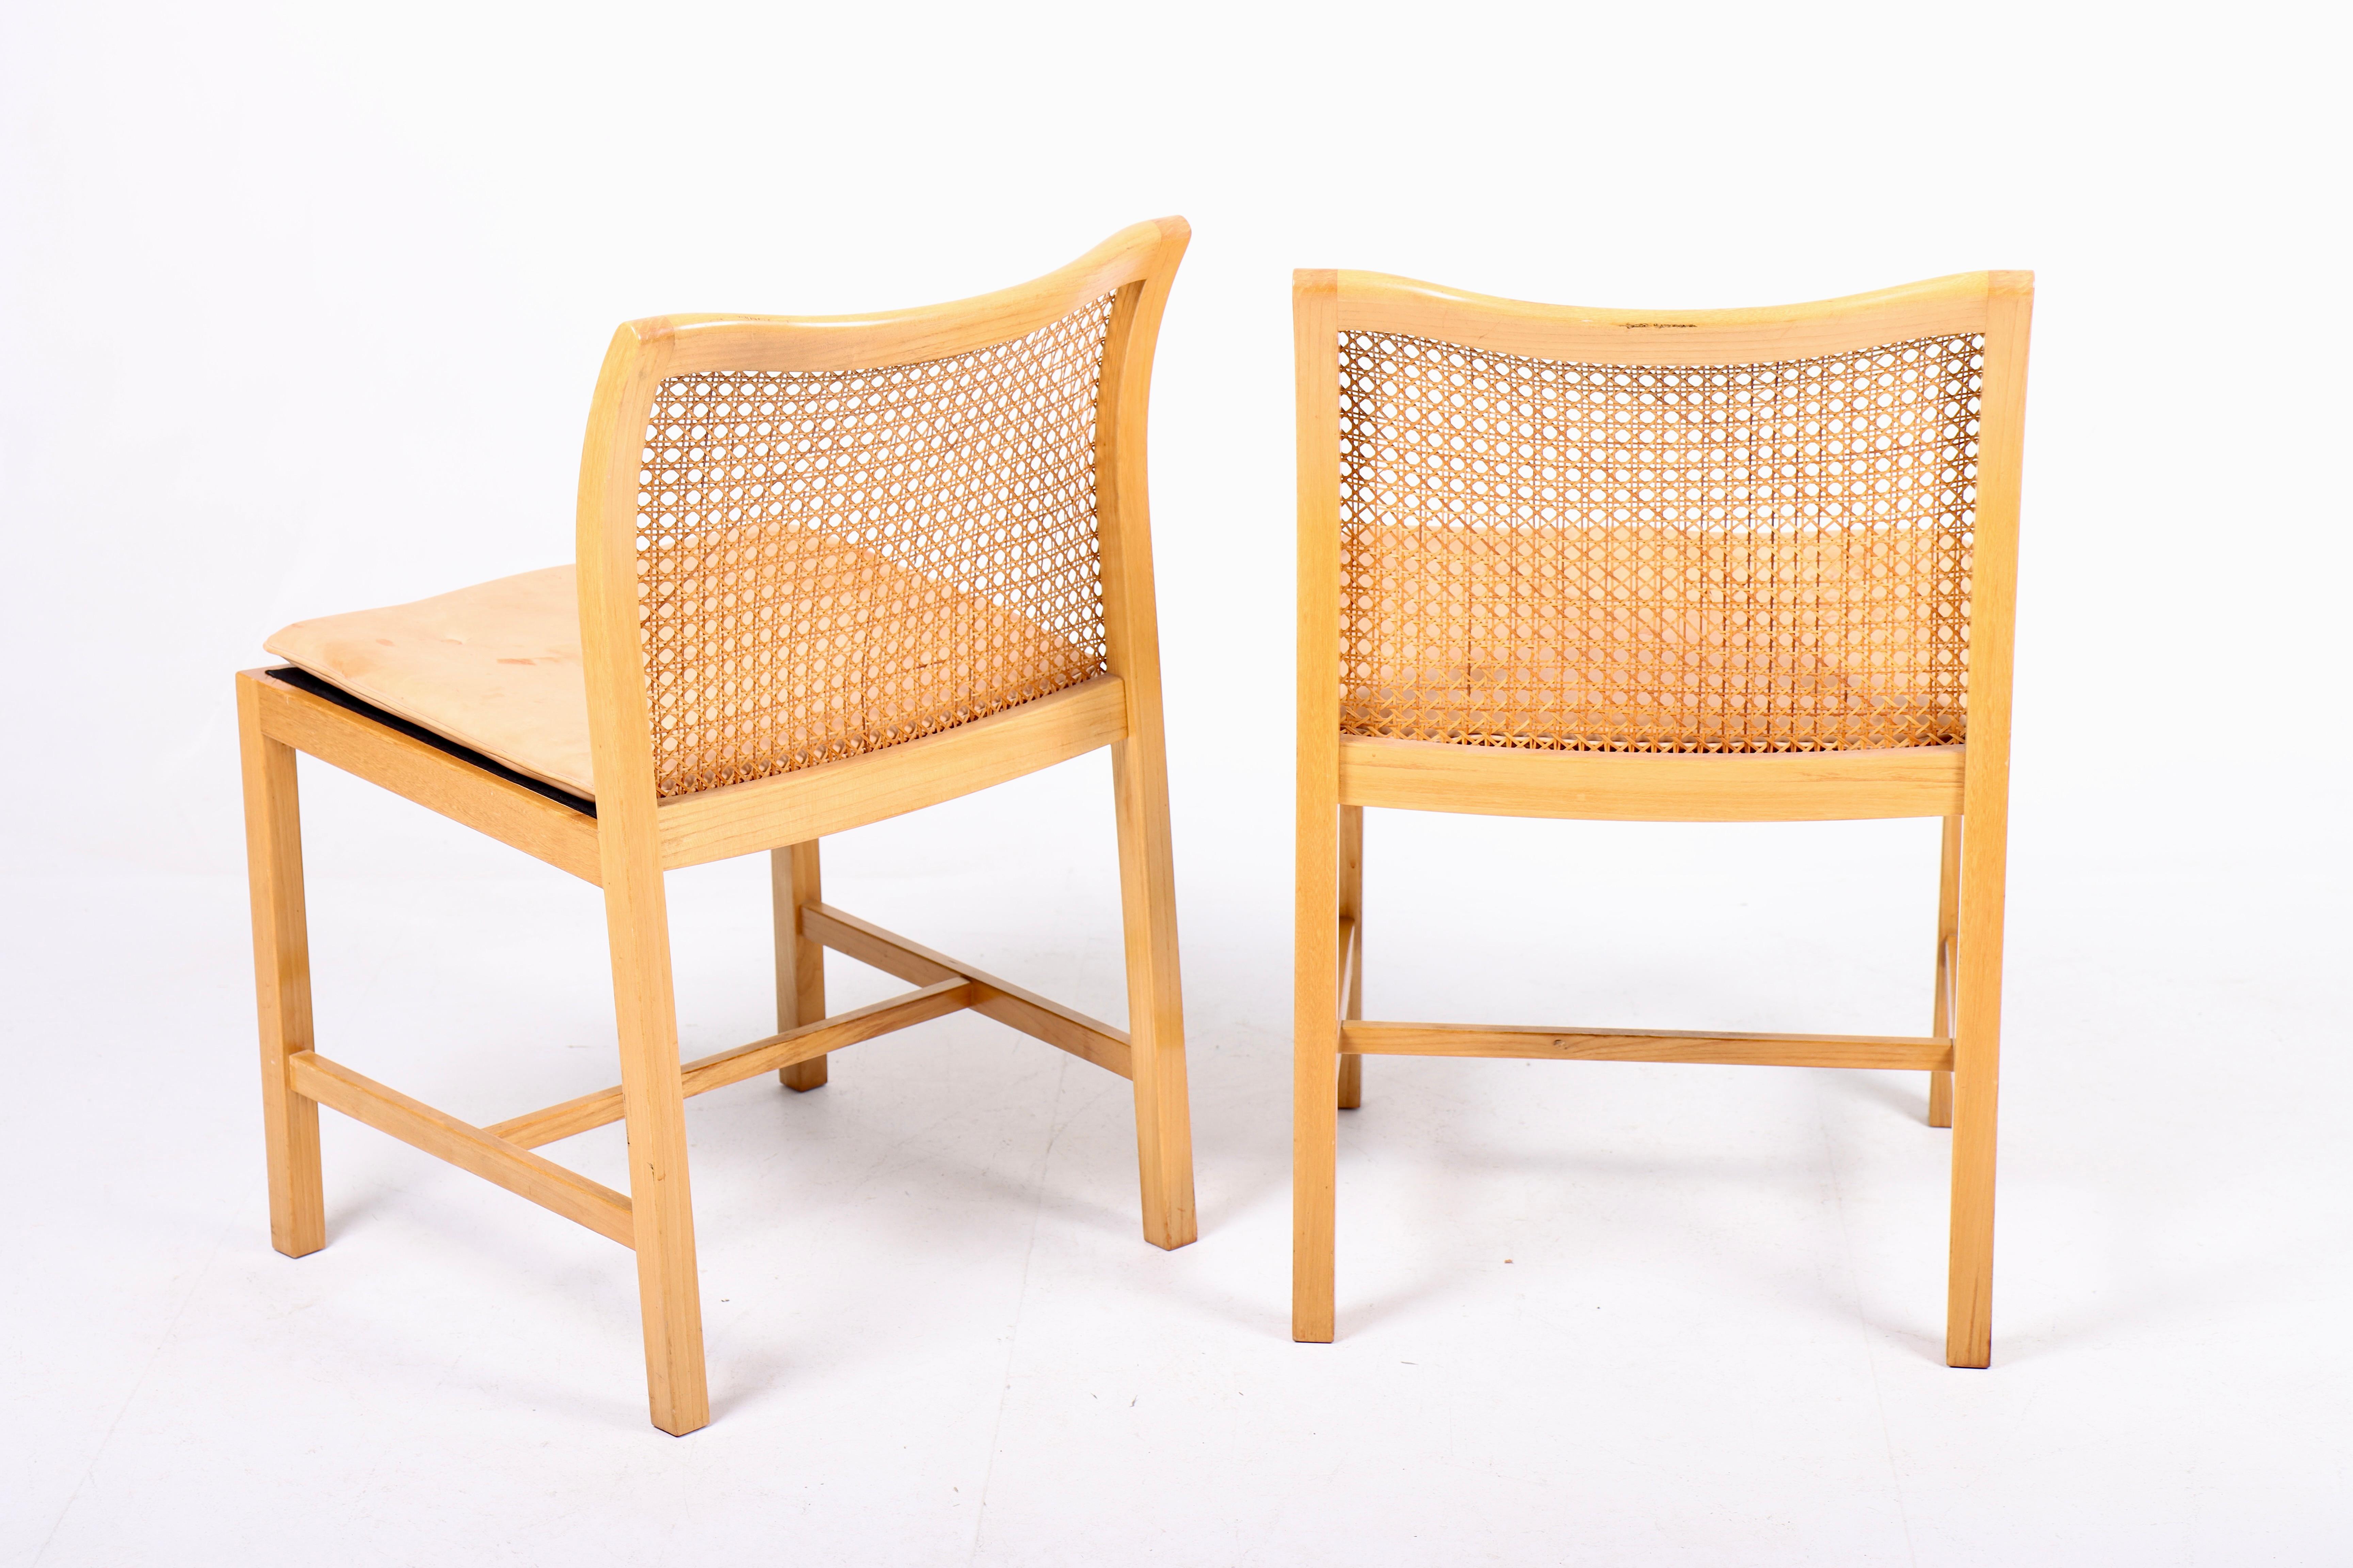 Mid-20th Century Pair of Danish Midcentury Side Chairs in Ash and Cognac Leather, 1960s For Sale